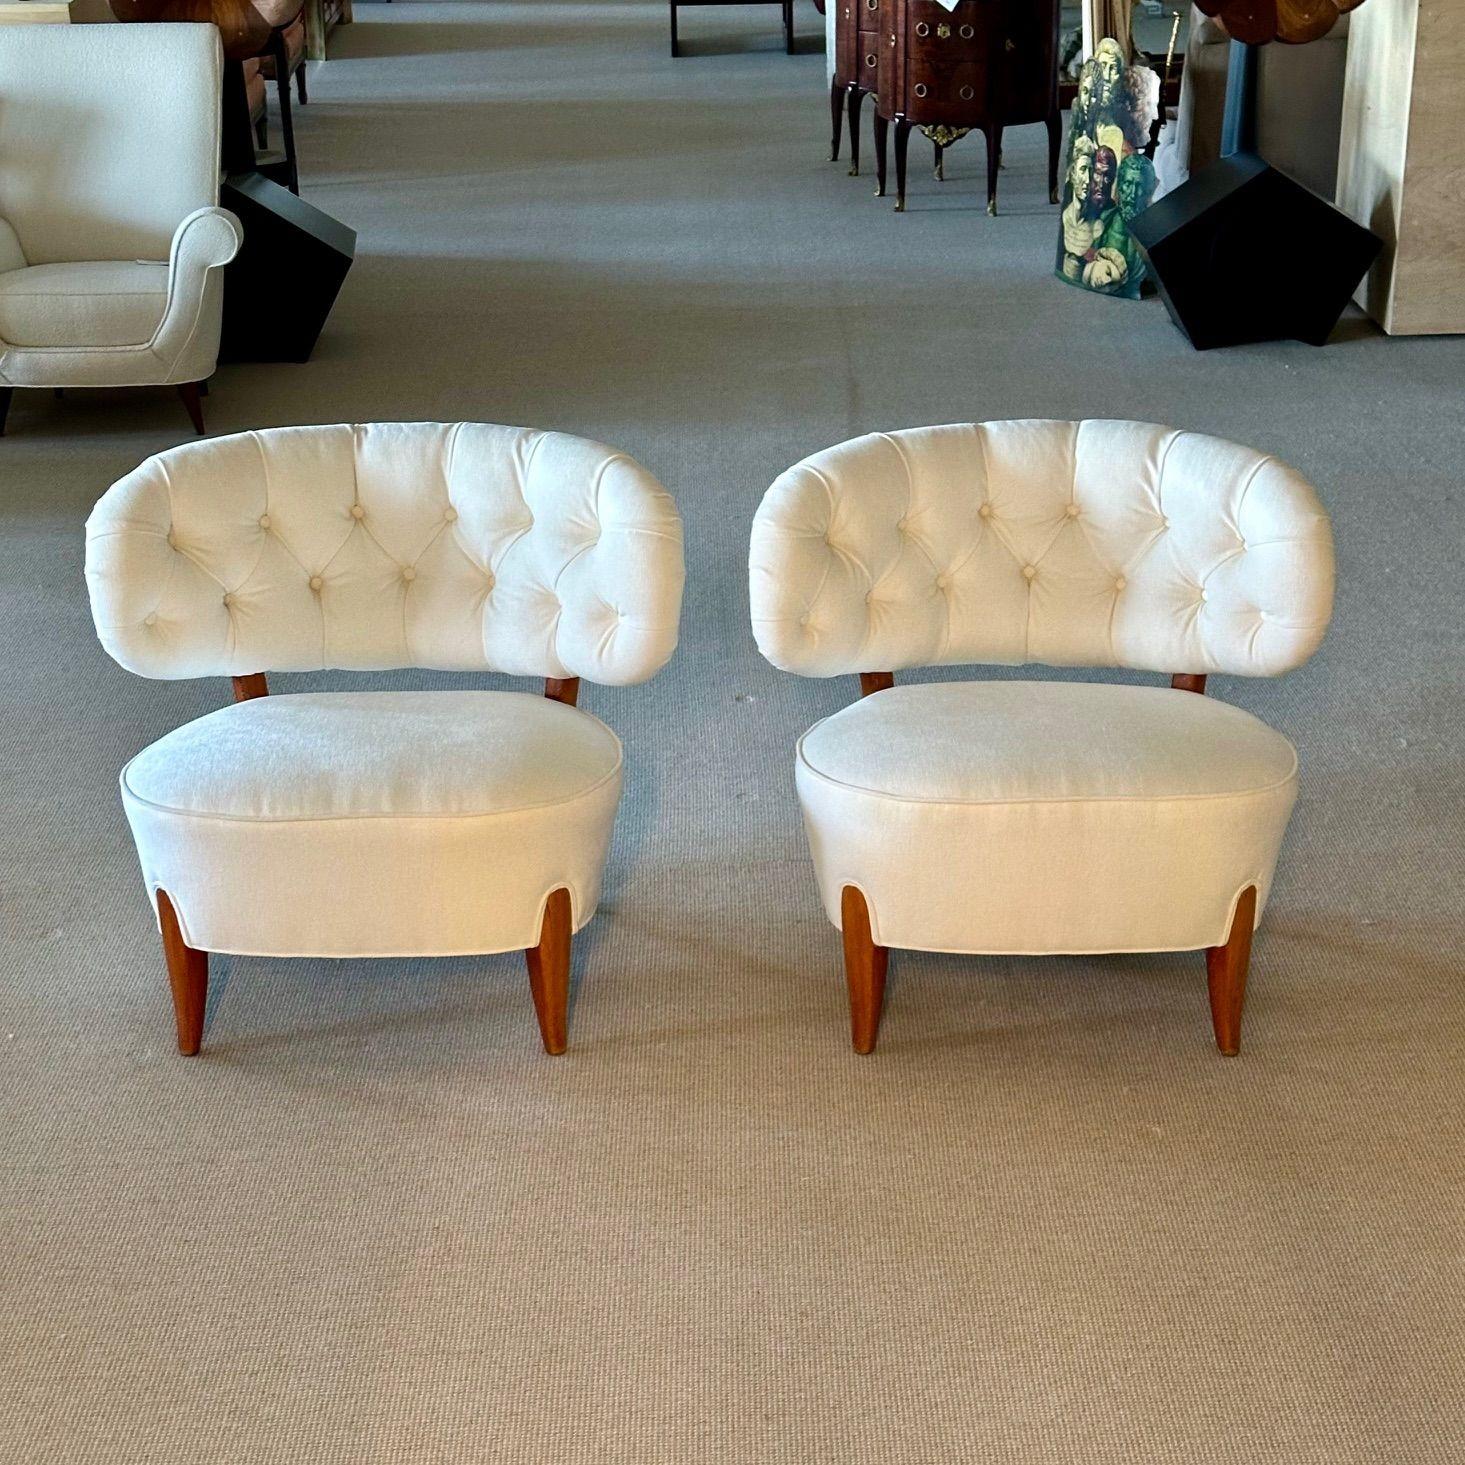 Otto Schulz, Mid-Century Lounge Chairs, White Velvet, Beech, Sweden, 1940s For Sale 13